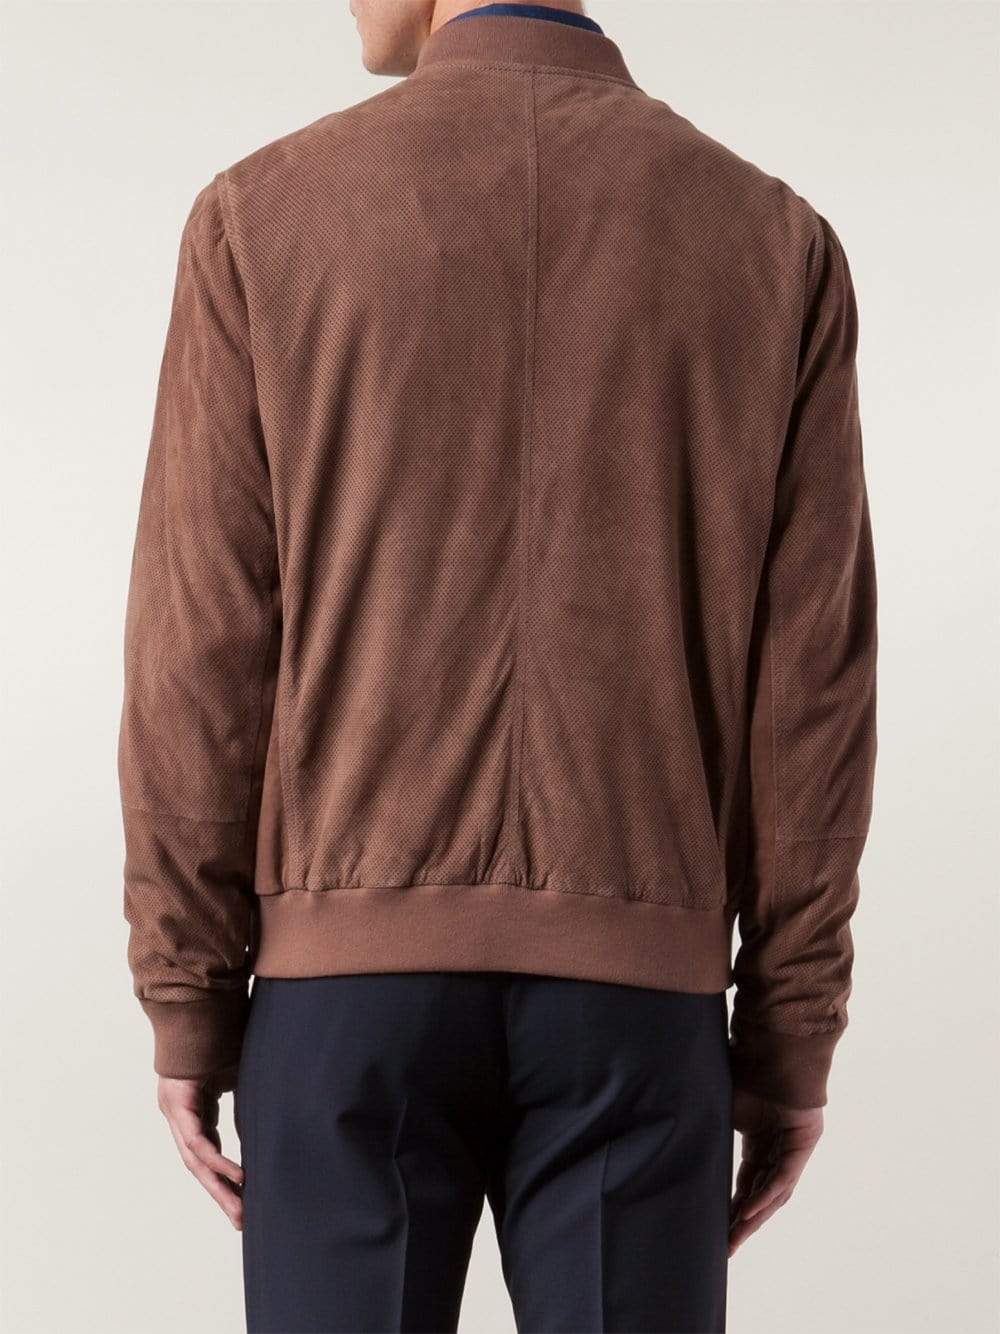 Perforated Suede Bomber MENSCLOTHINGJACKET BRUNELLO CUCINELLI   